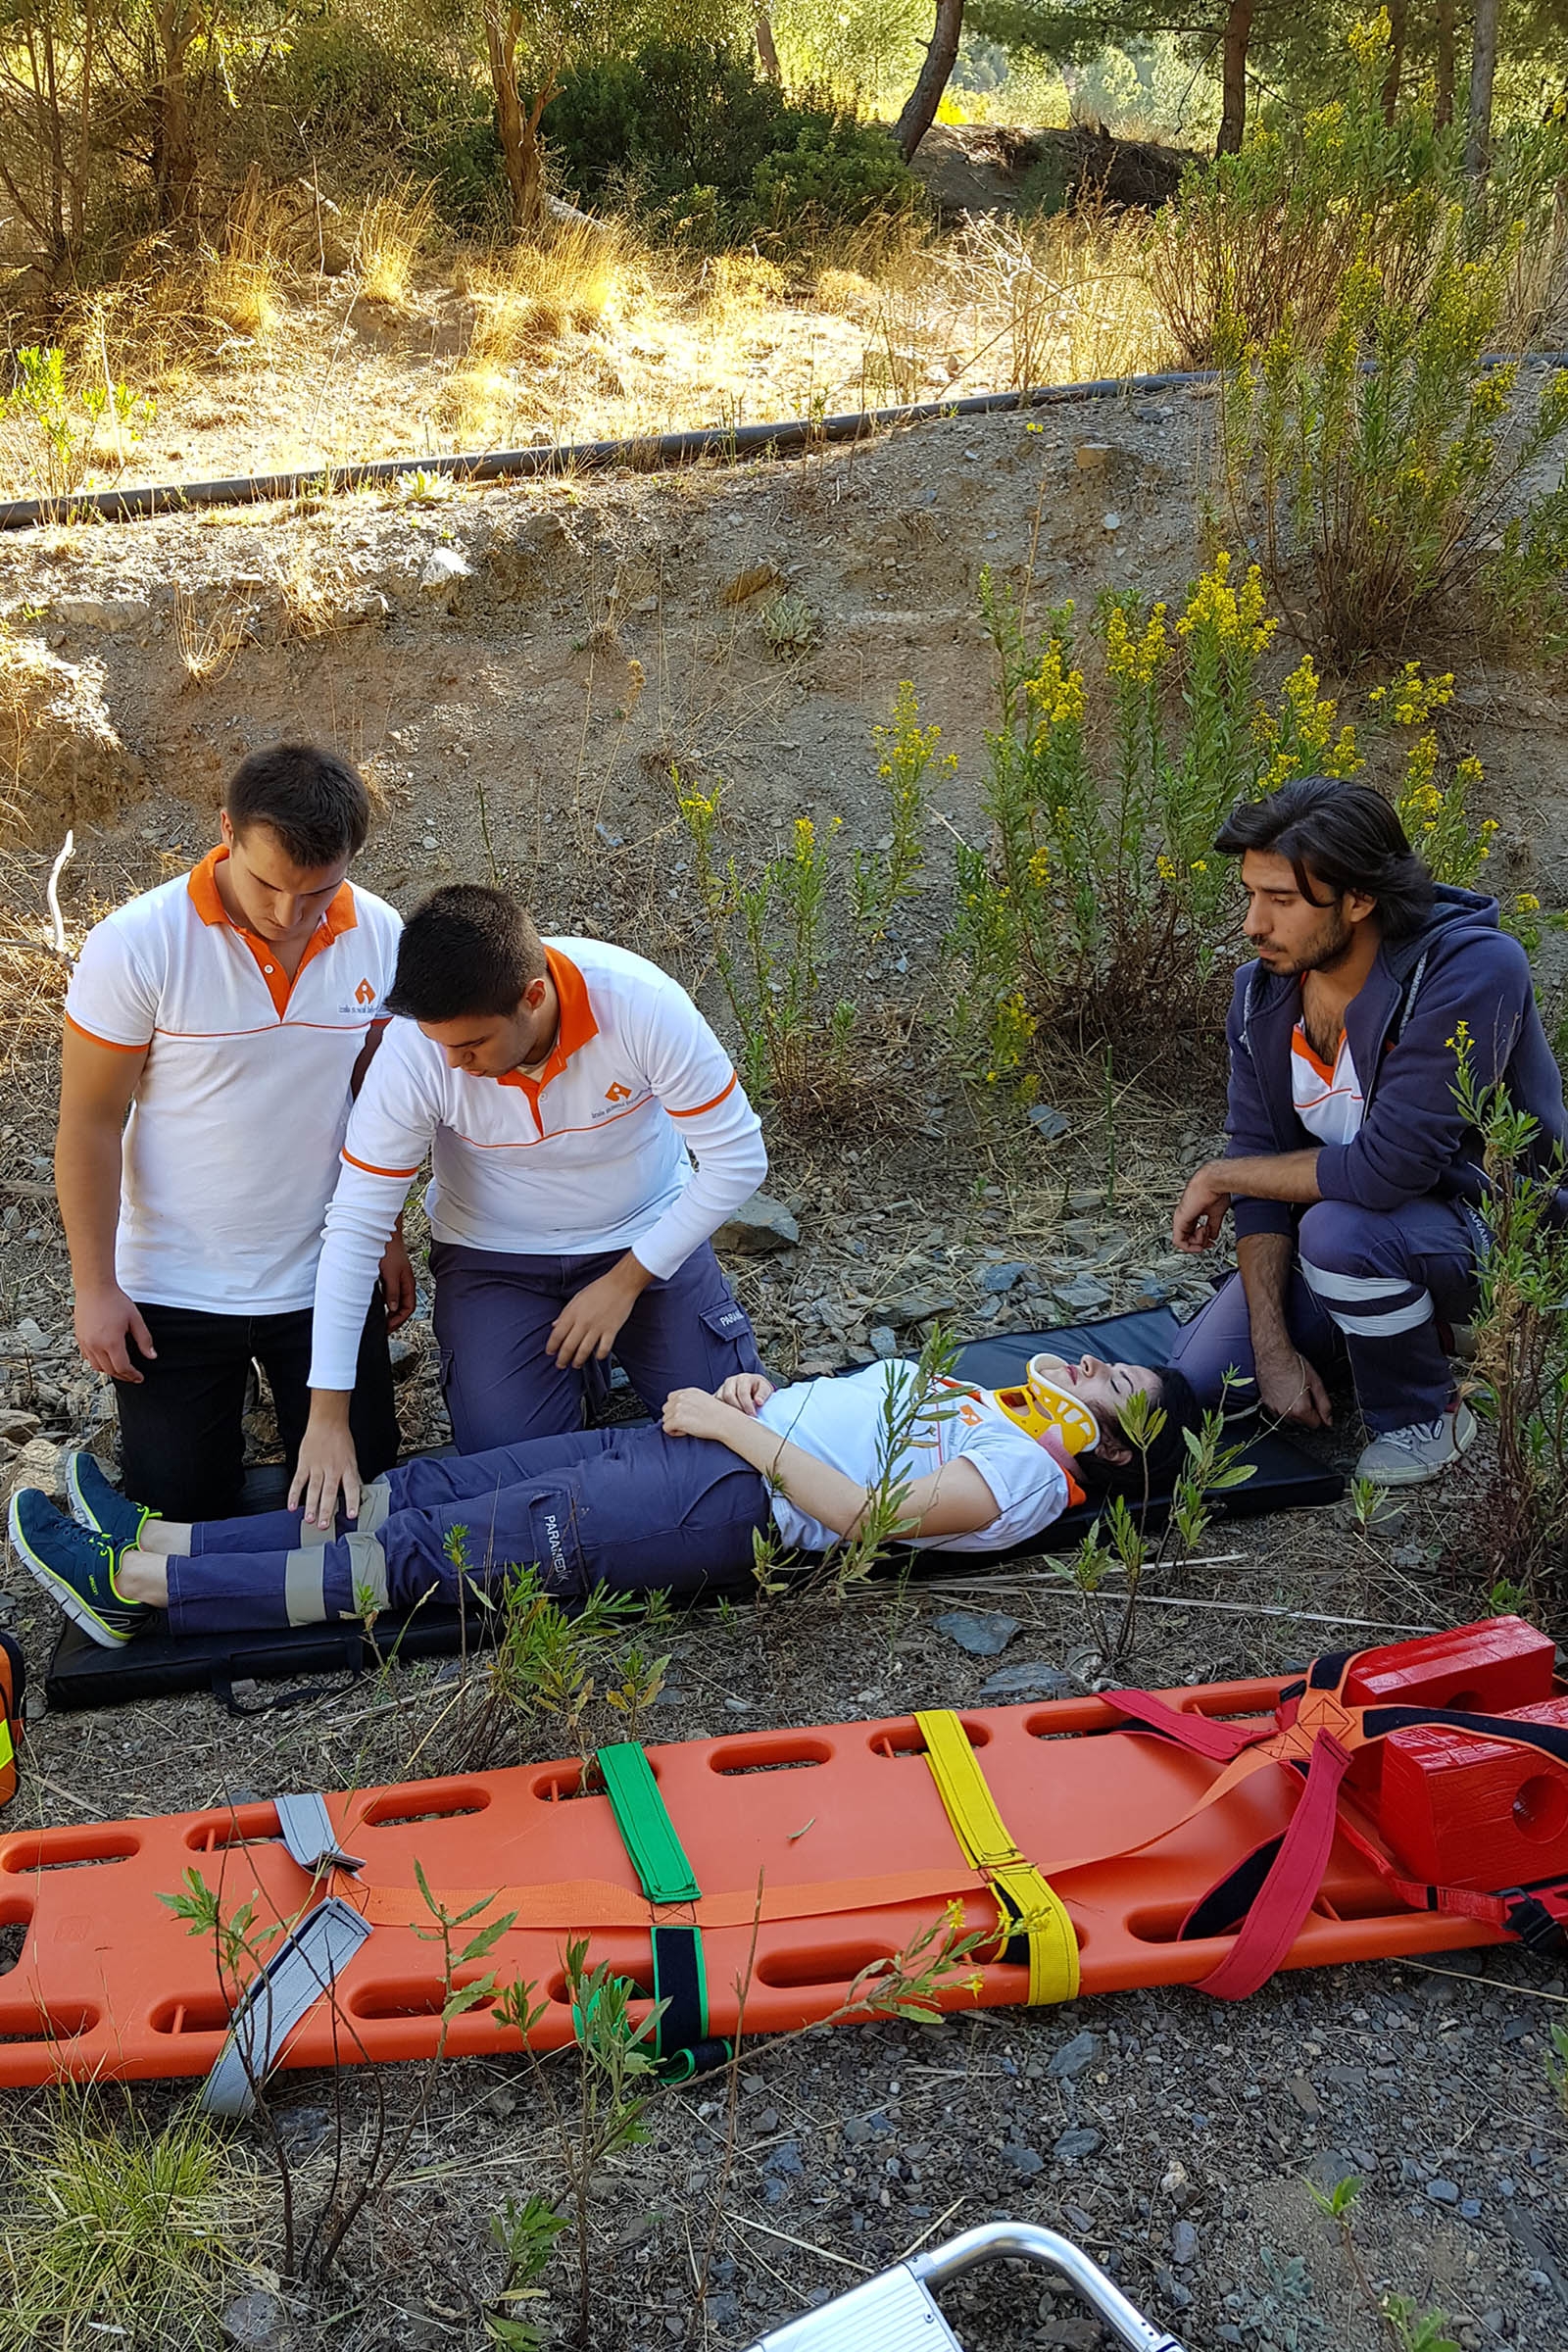 EXCITING EMERGENCY SIMULATIONS OF PARAMEDIC STUDENTS  